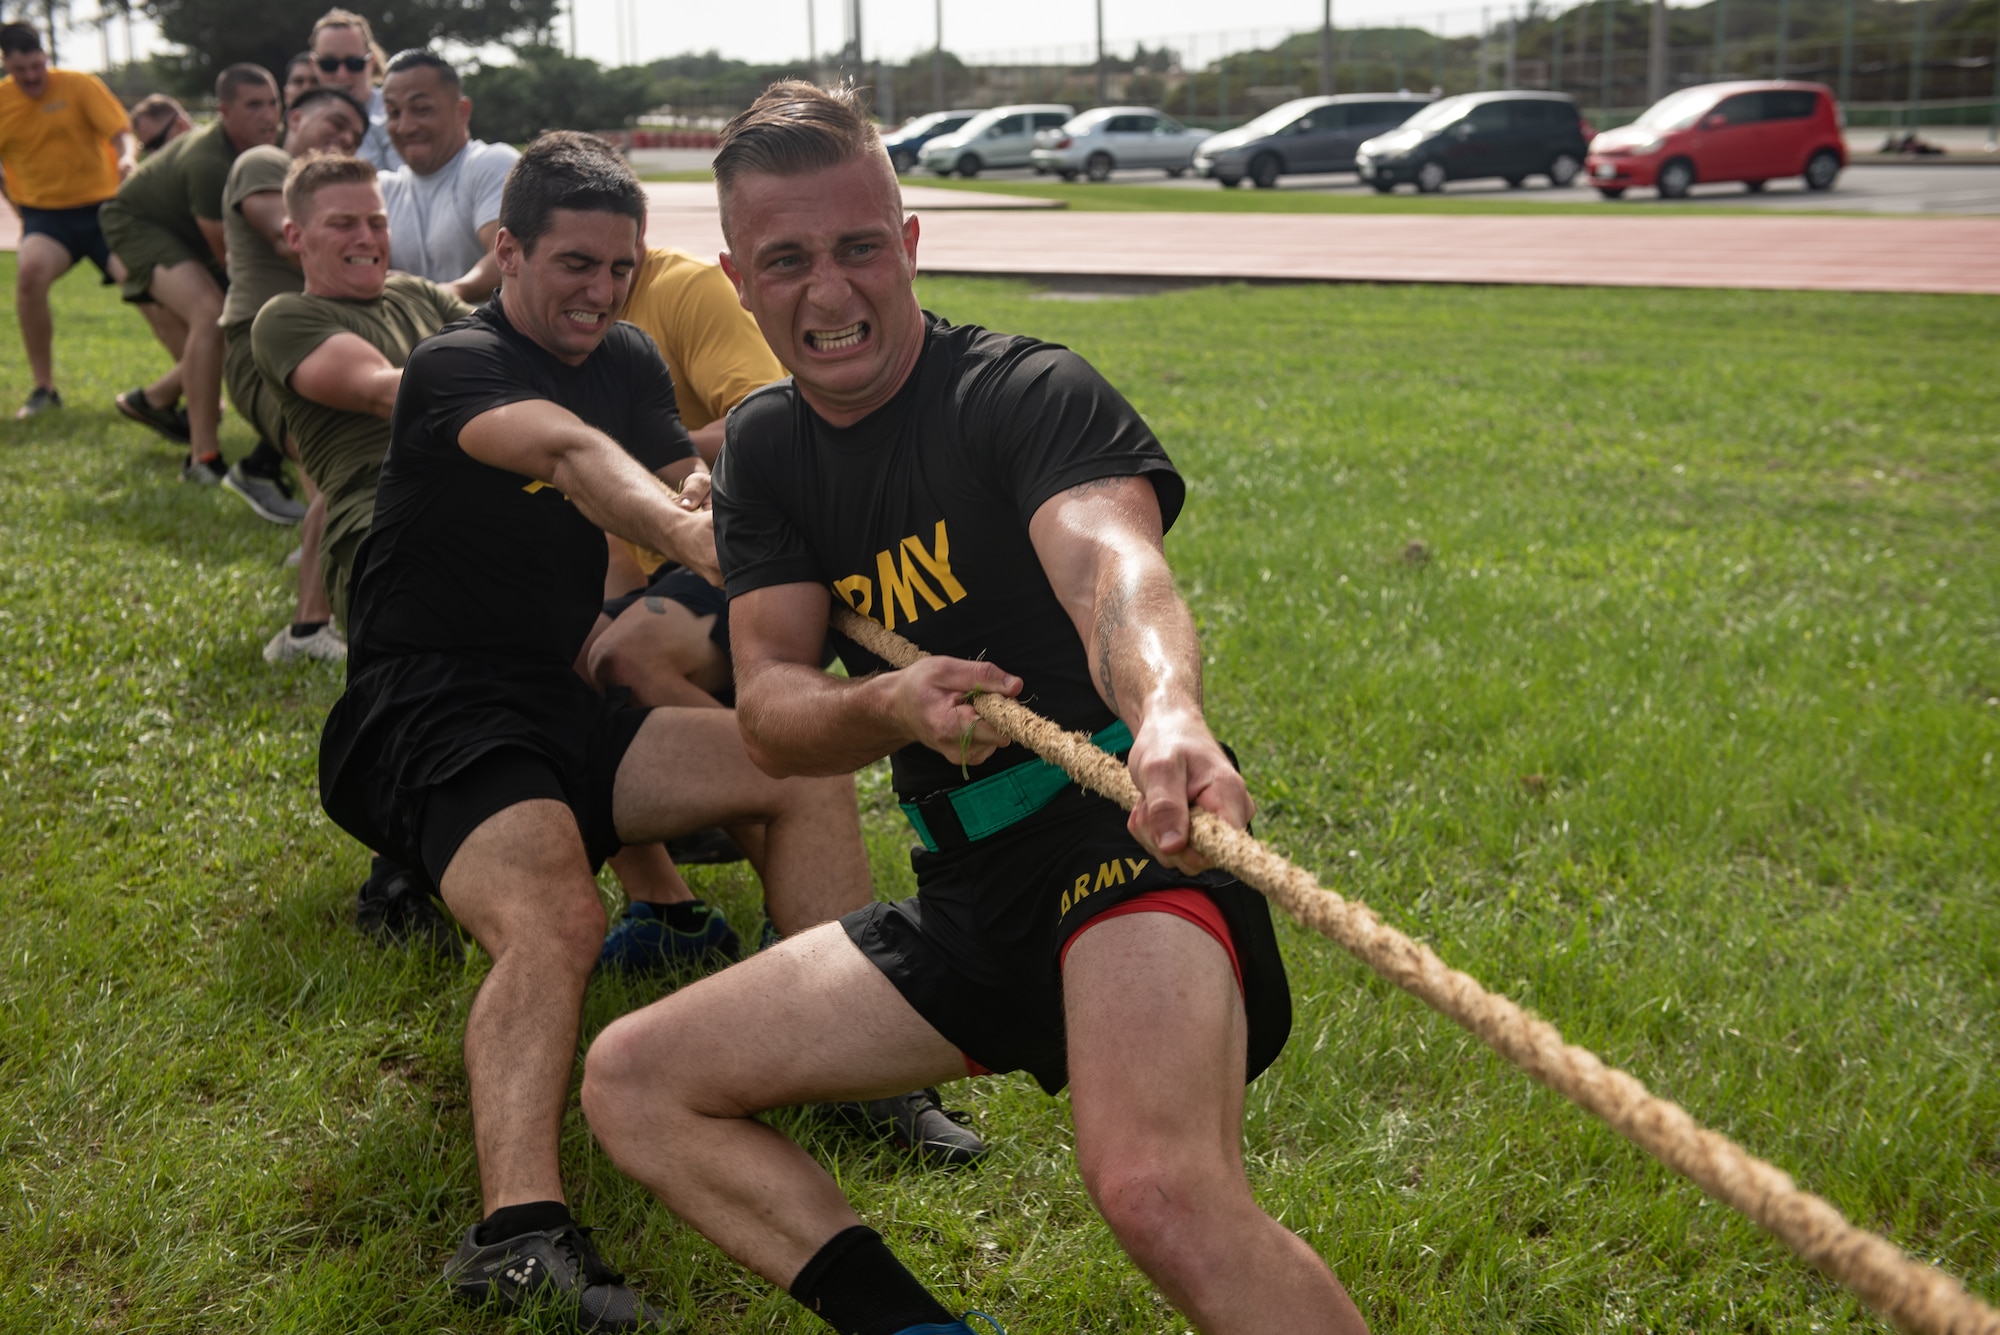 Members of the Blue Team compete in a game of tug-of-war during the Okinawa Joint Fitness Challenge Sept. 26, 2018, at Kadena Air Base, Japan. The OJFC was a portion of the OJE that enabled students to bond while overcoming obstacles and challenges faced in the battlefield. (U.S. Air Force photo by Staff Sgt. Micaiah Anthony)